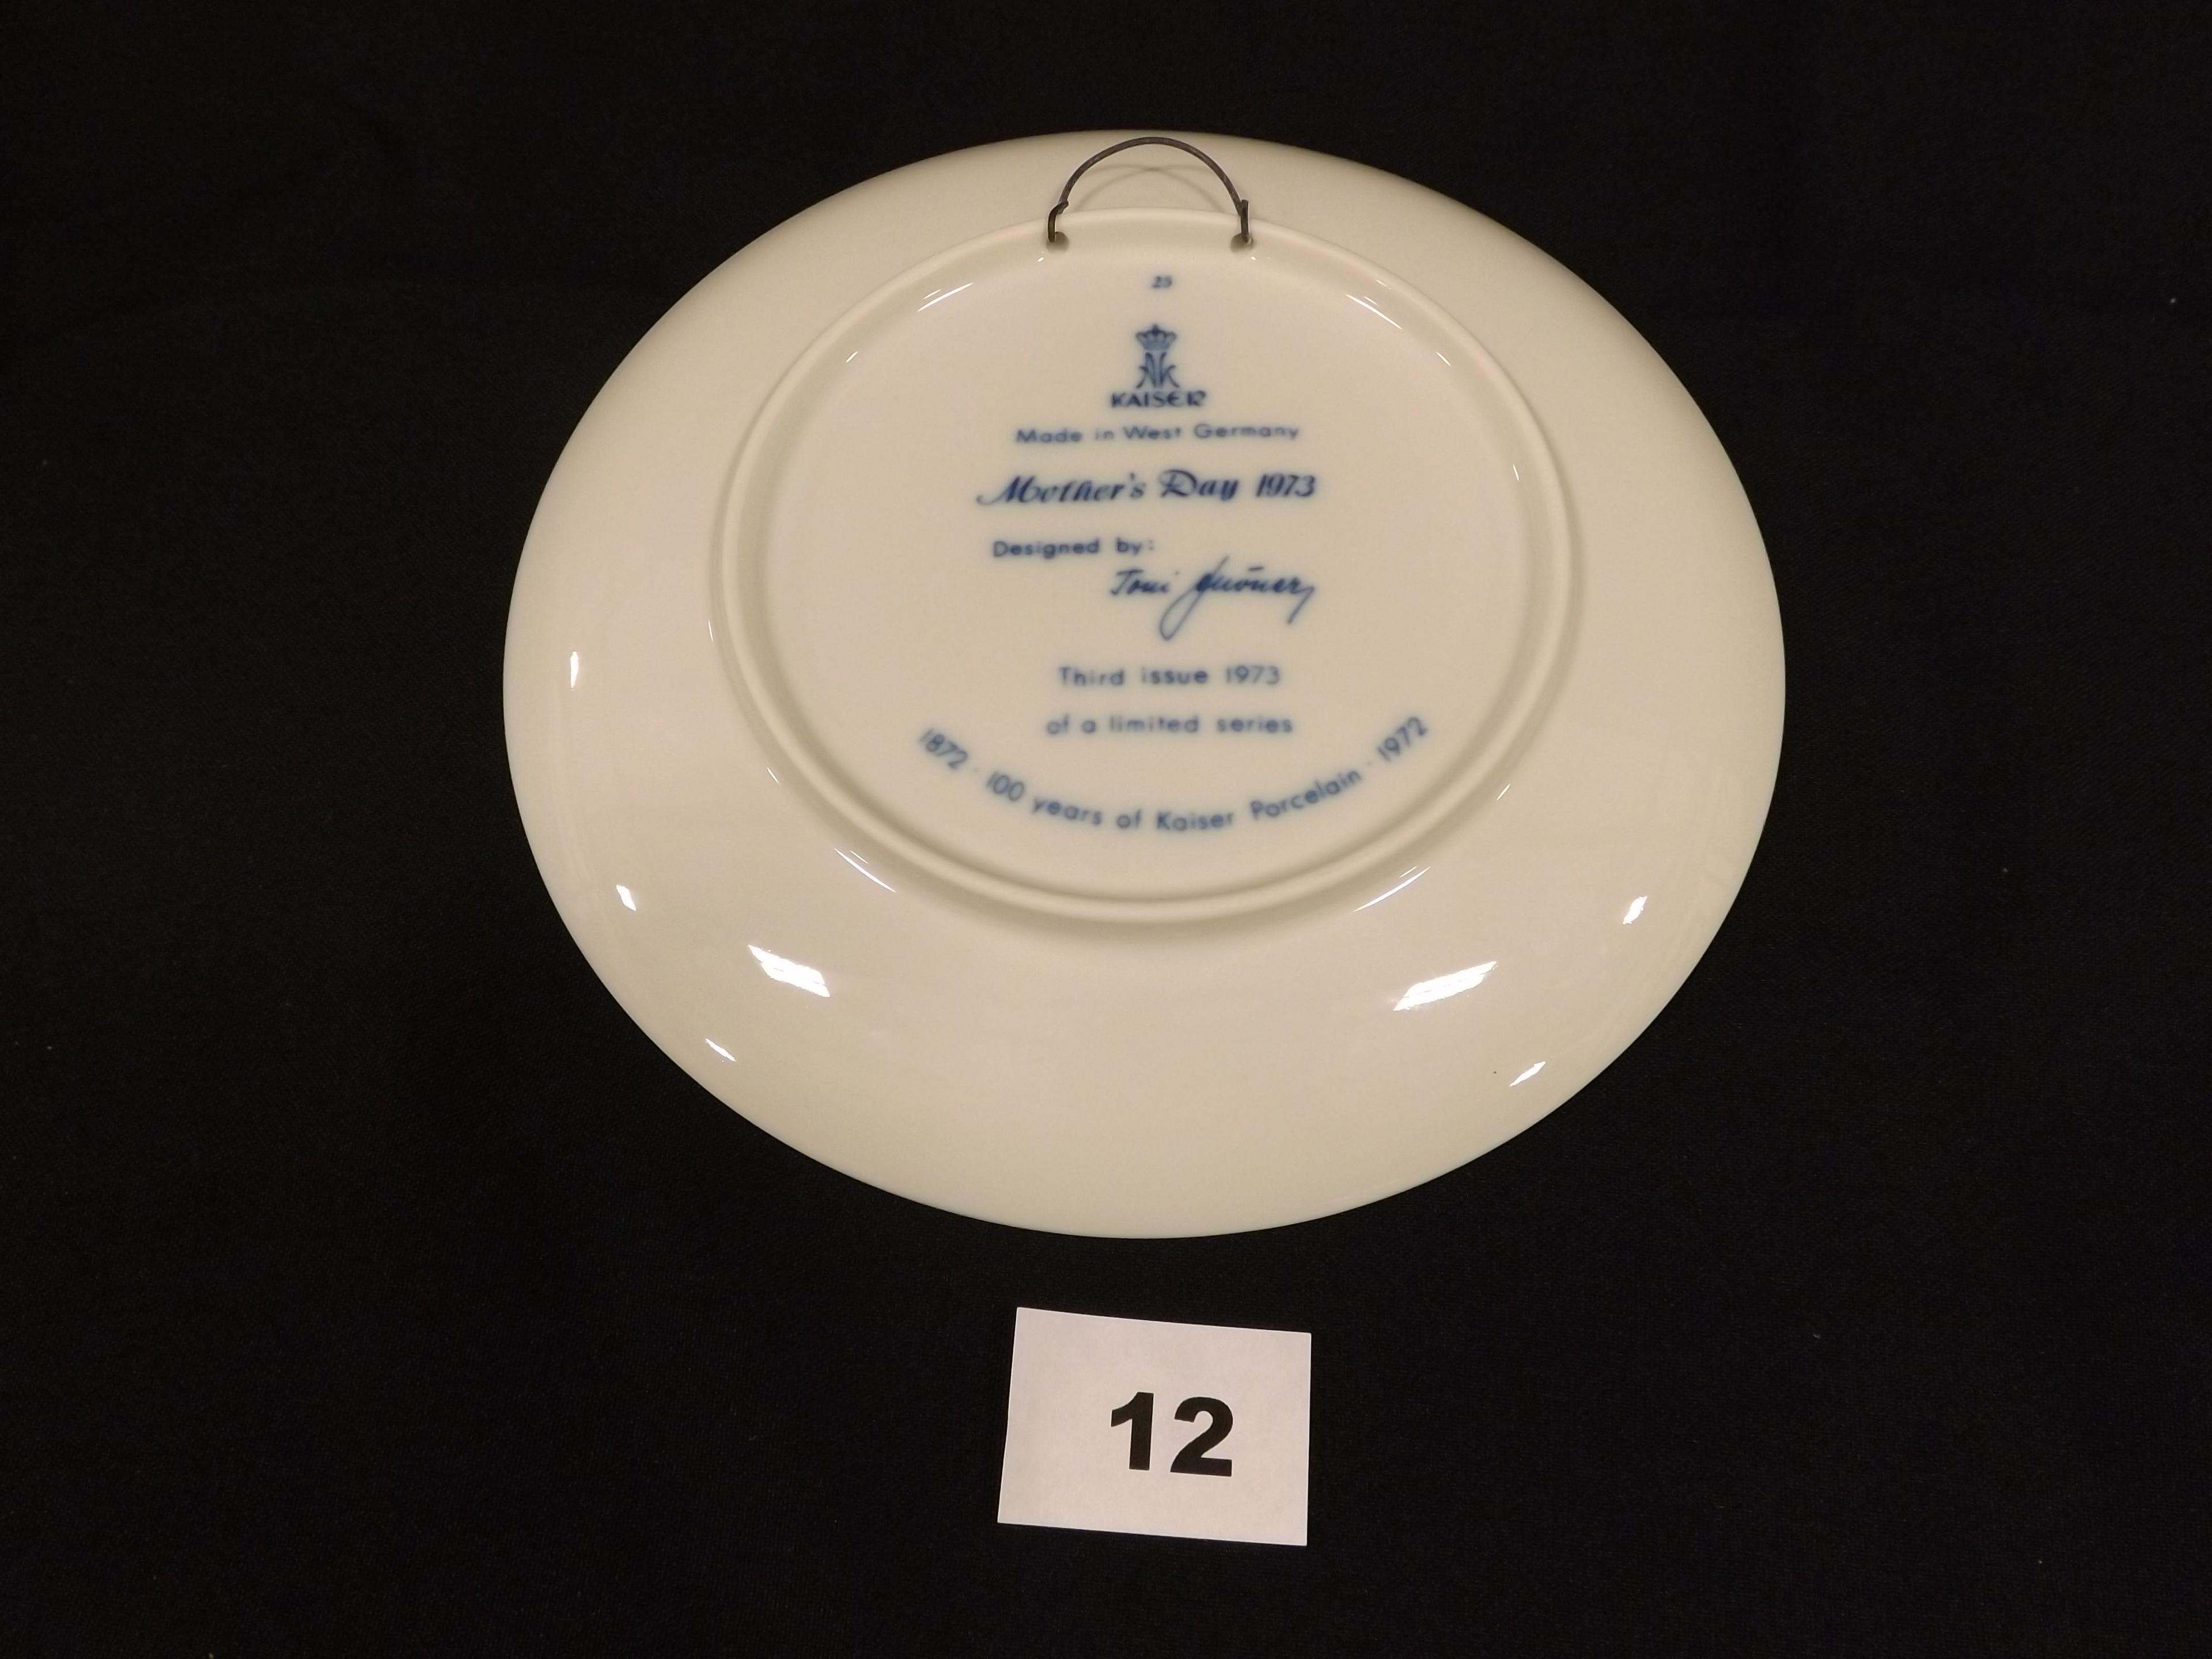 3 Blue Decorative Mother's Day Plates, 7.75" dia